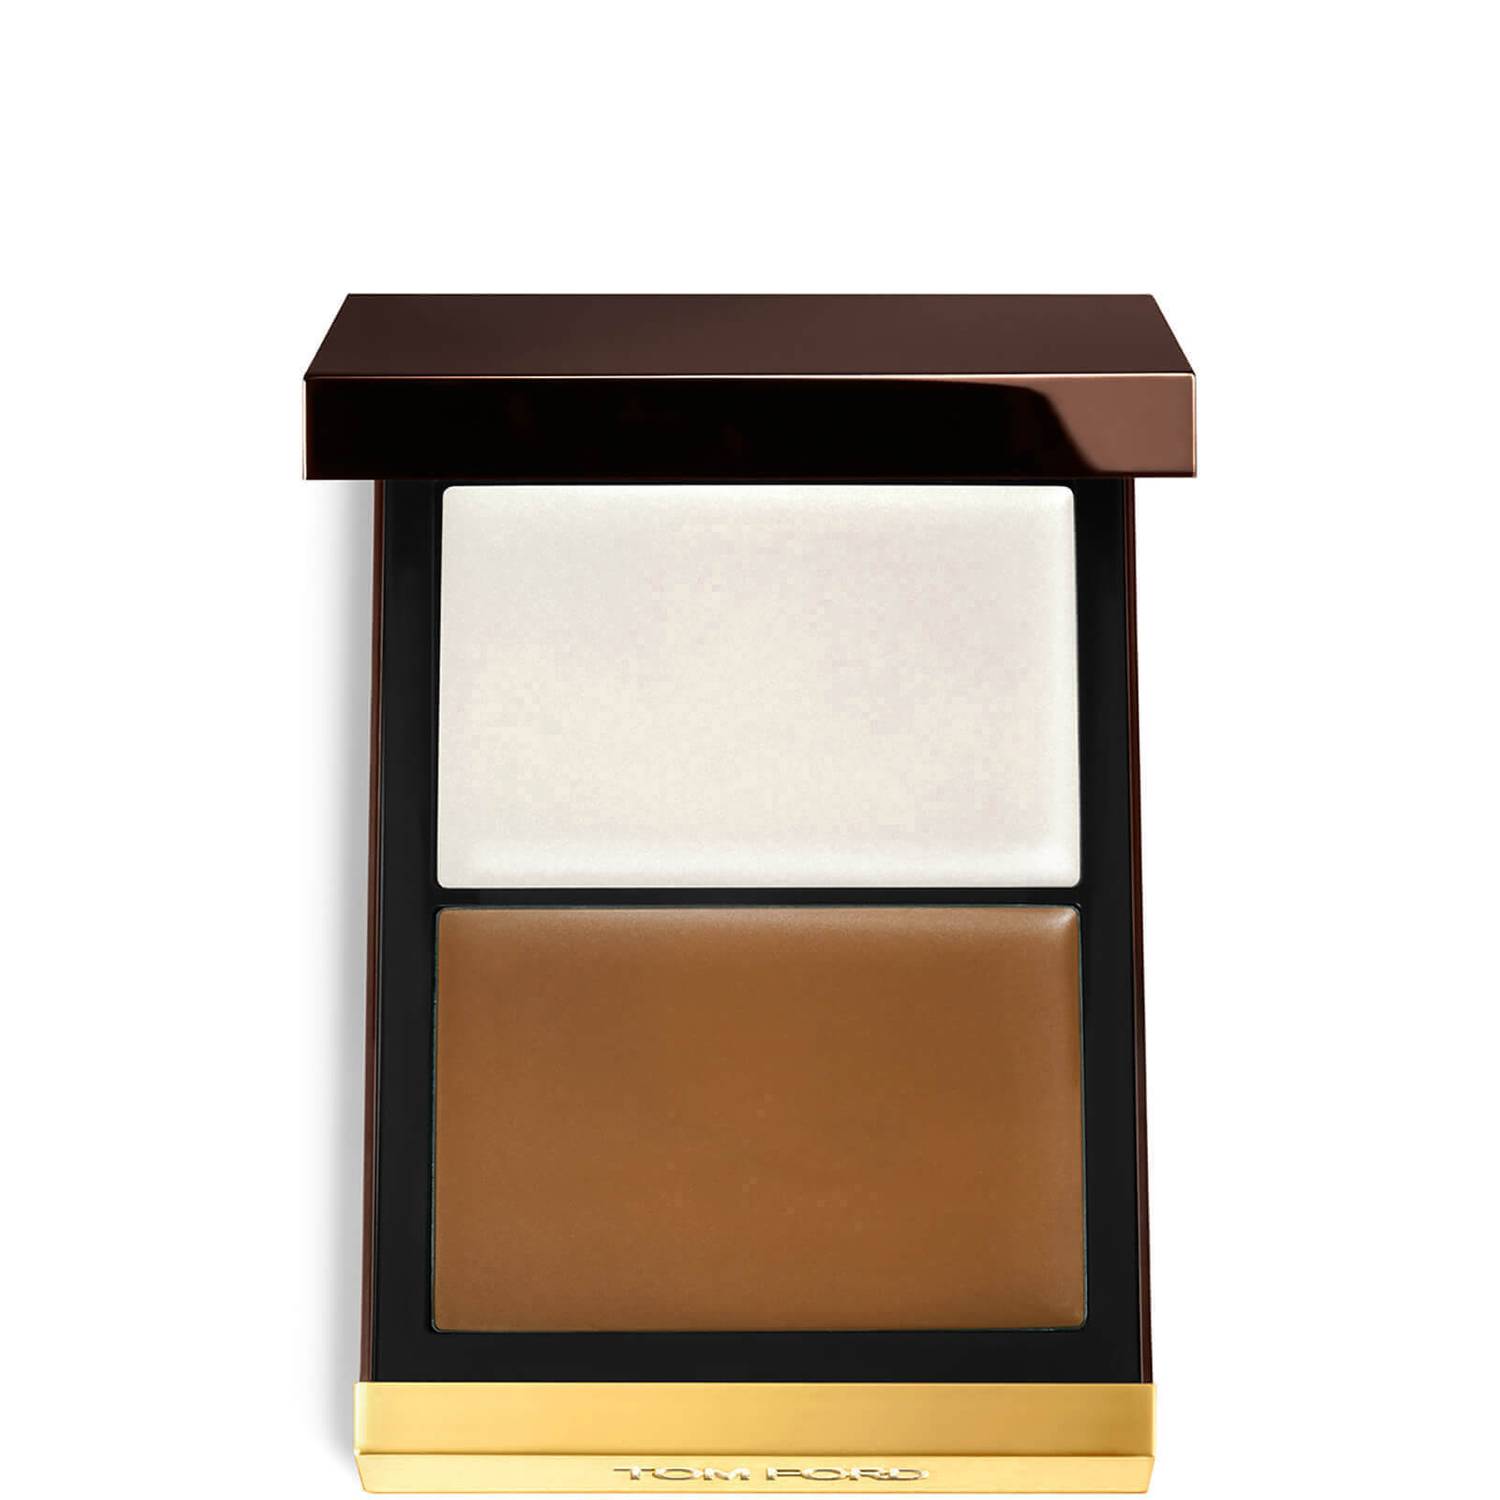 Cliomakeup-tendenze-beauty-and-just-like-that-TOM-FORD-SHADE-AND-ILLUMINATE